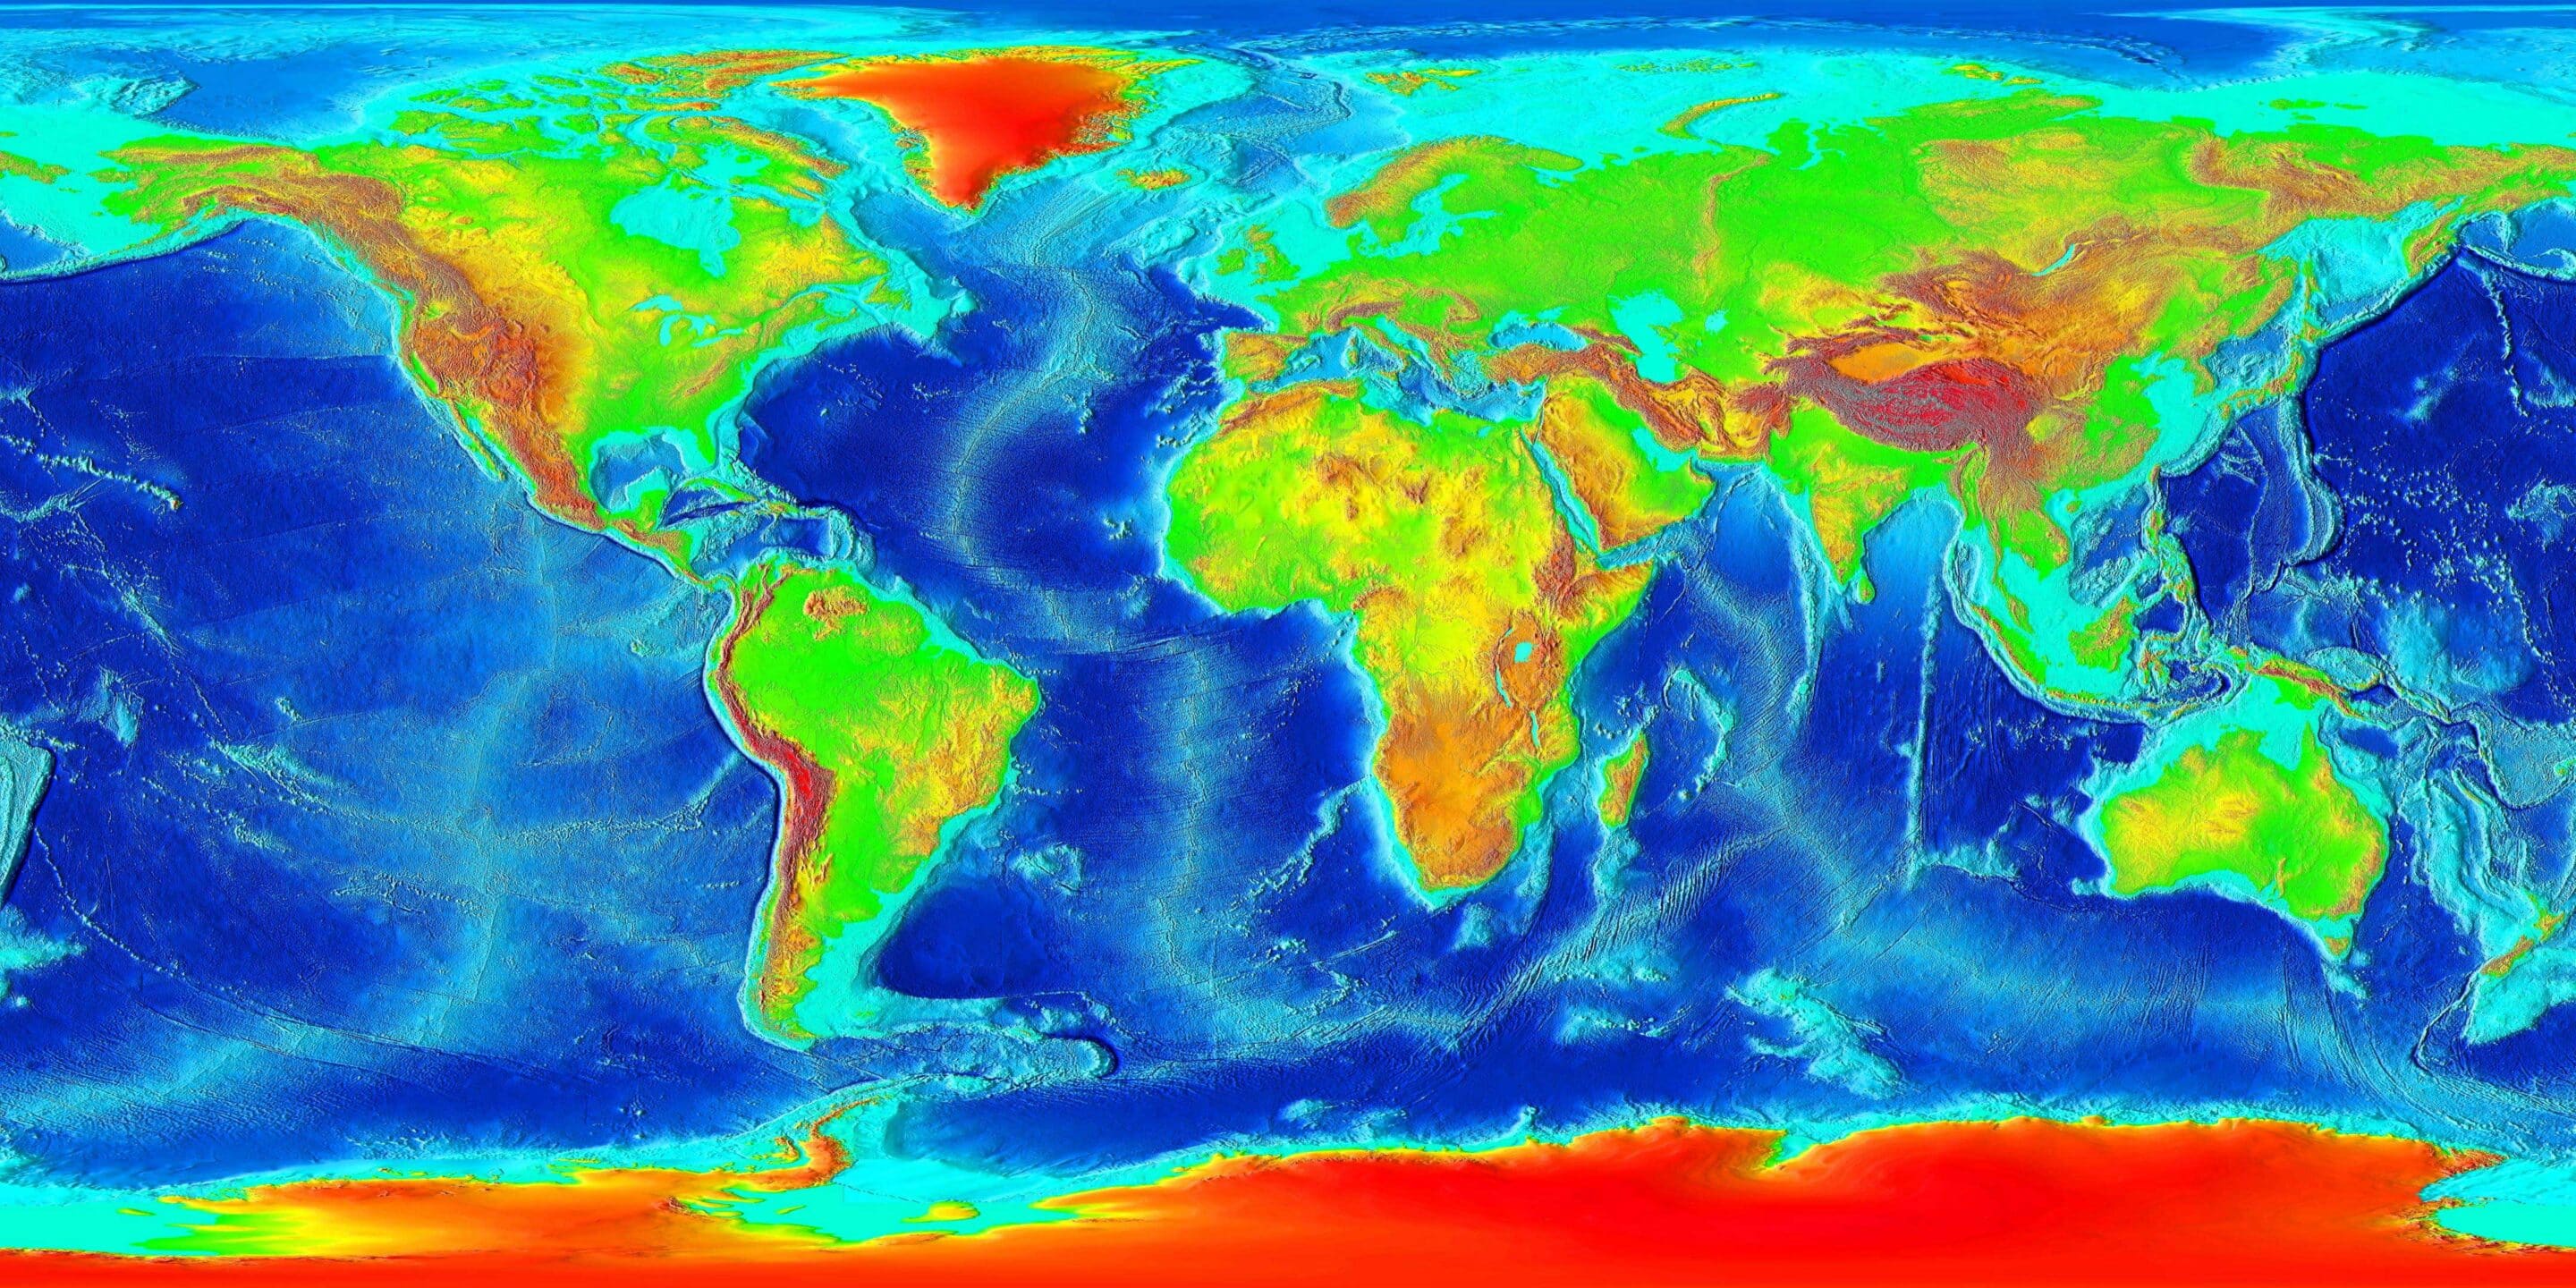 Scientists and researchers are calling for organizations to start mapping the ocean floor.